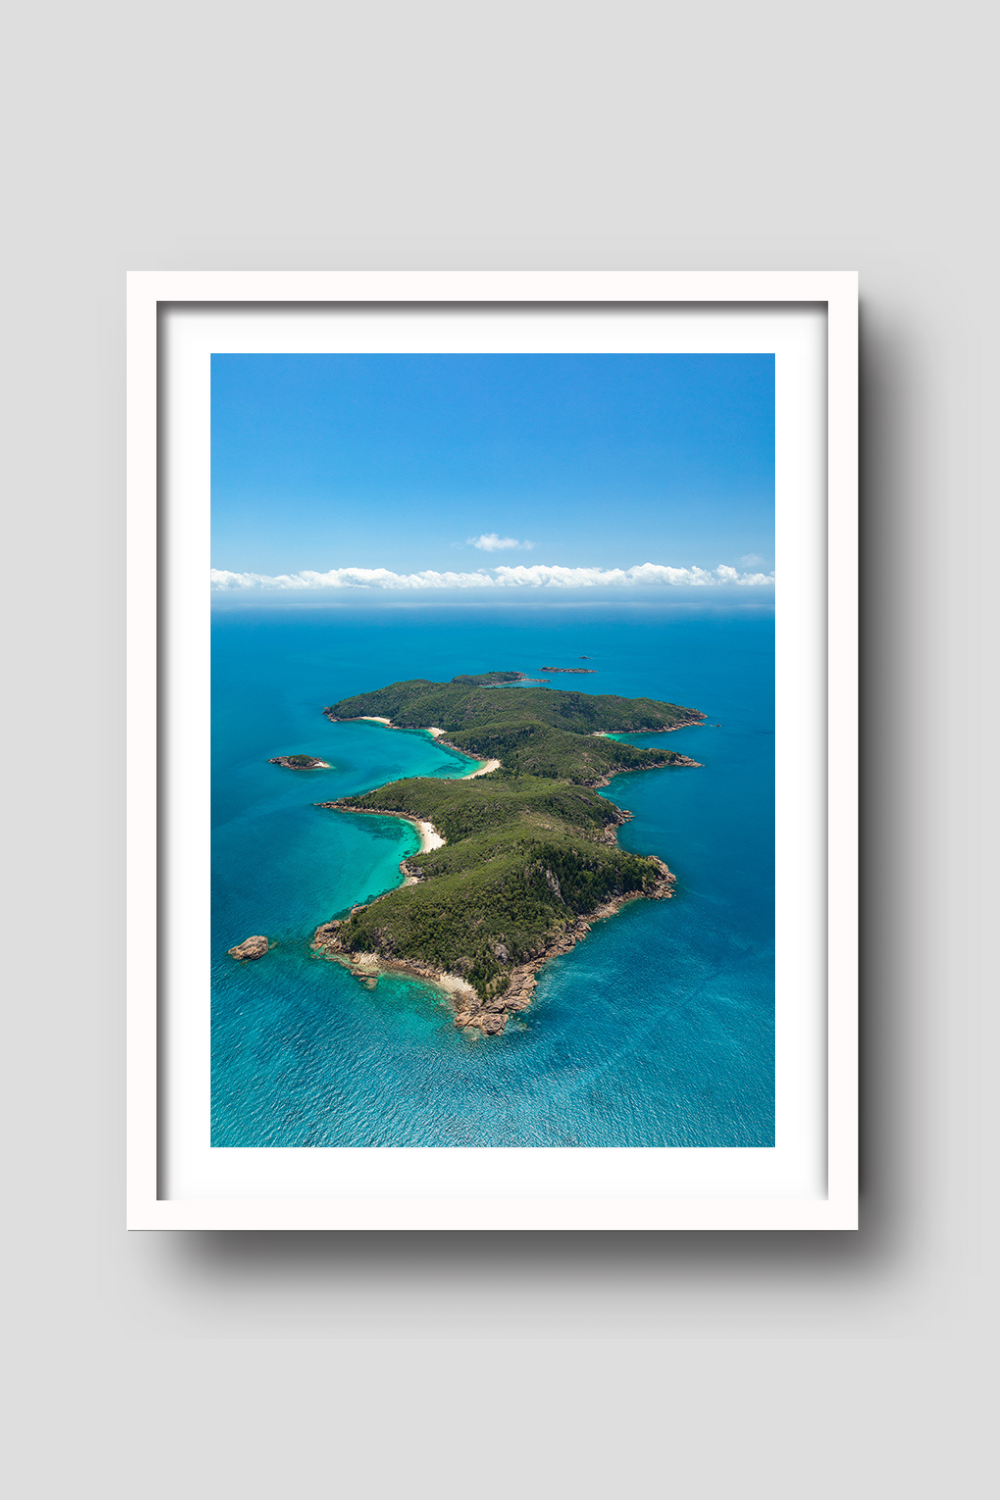 aerial of island with secluded white sandy bay and blue ocean surrounding